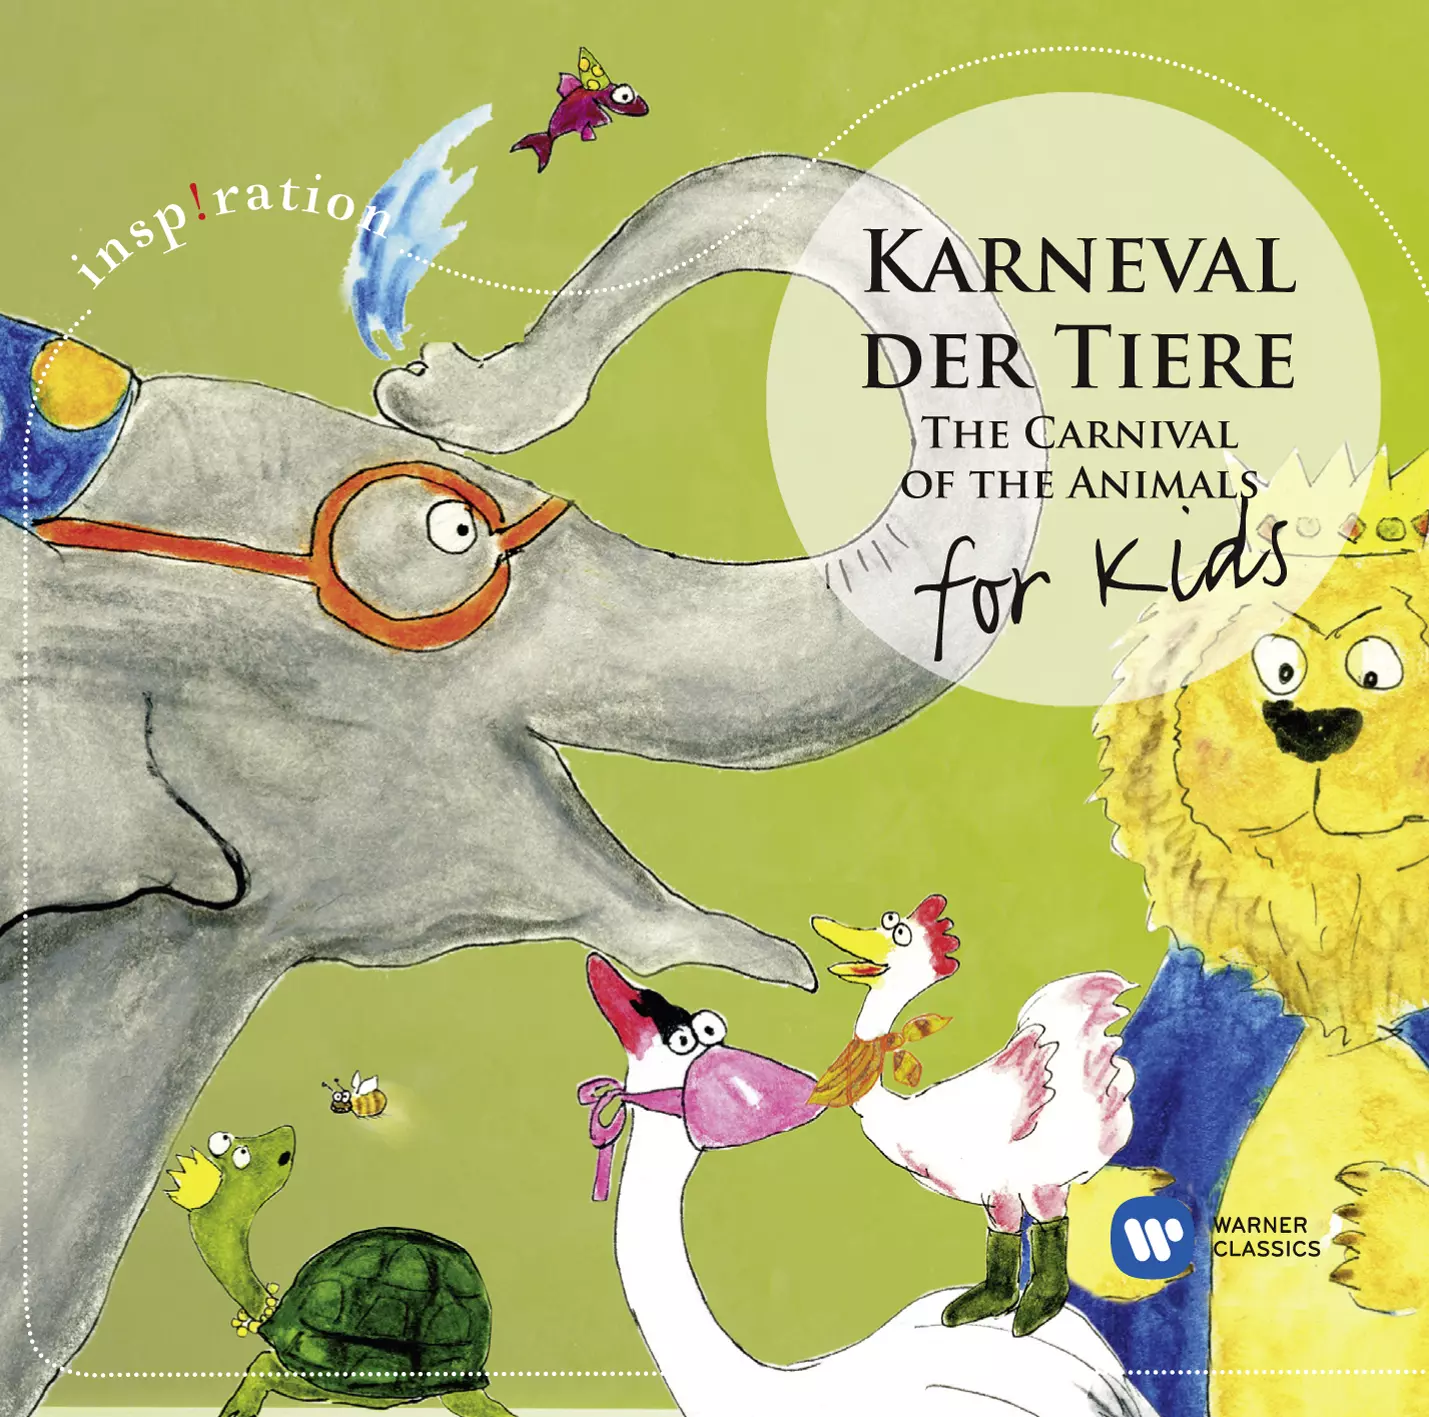 The Carnival of the Animals - For Kids